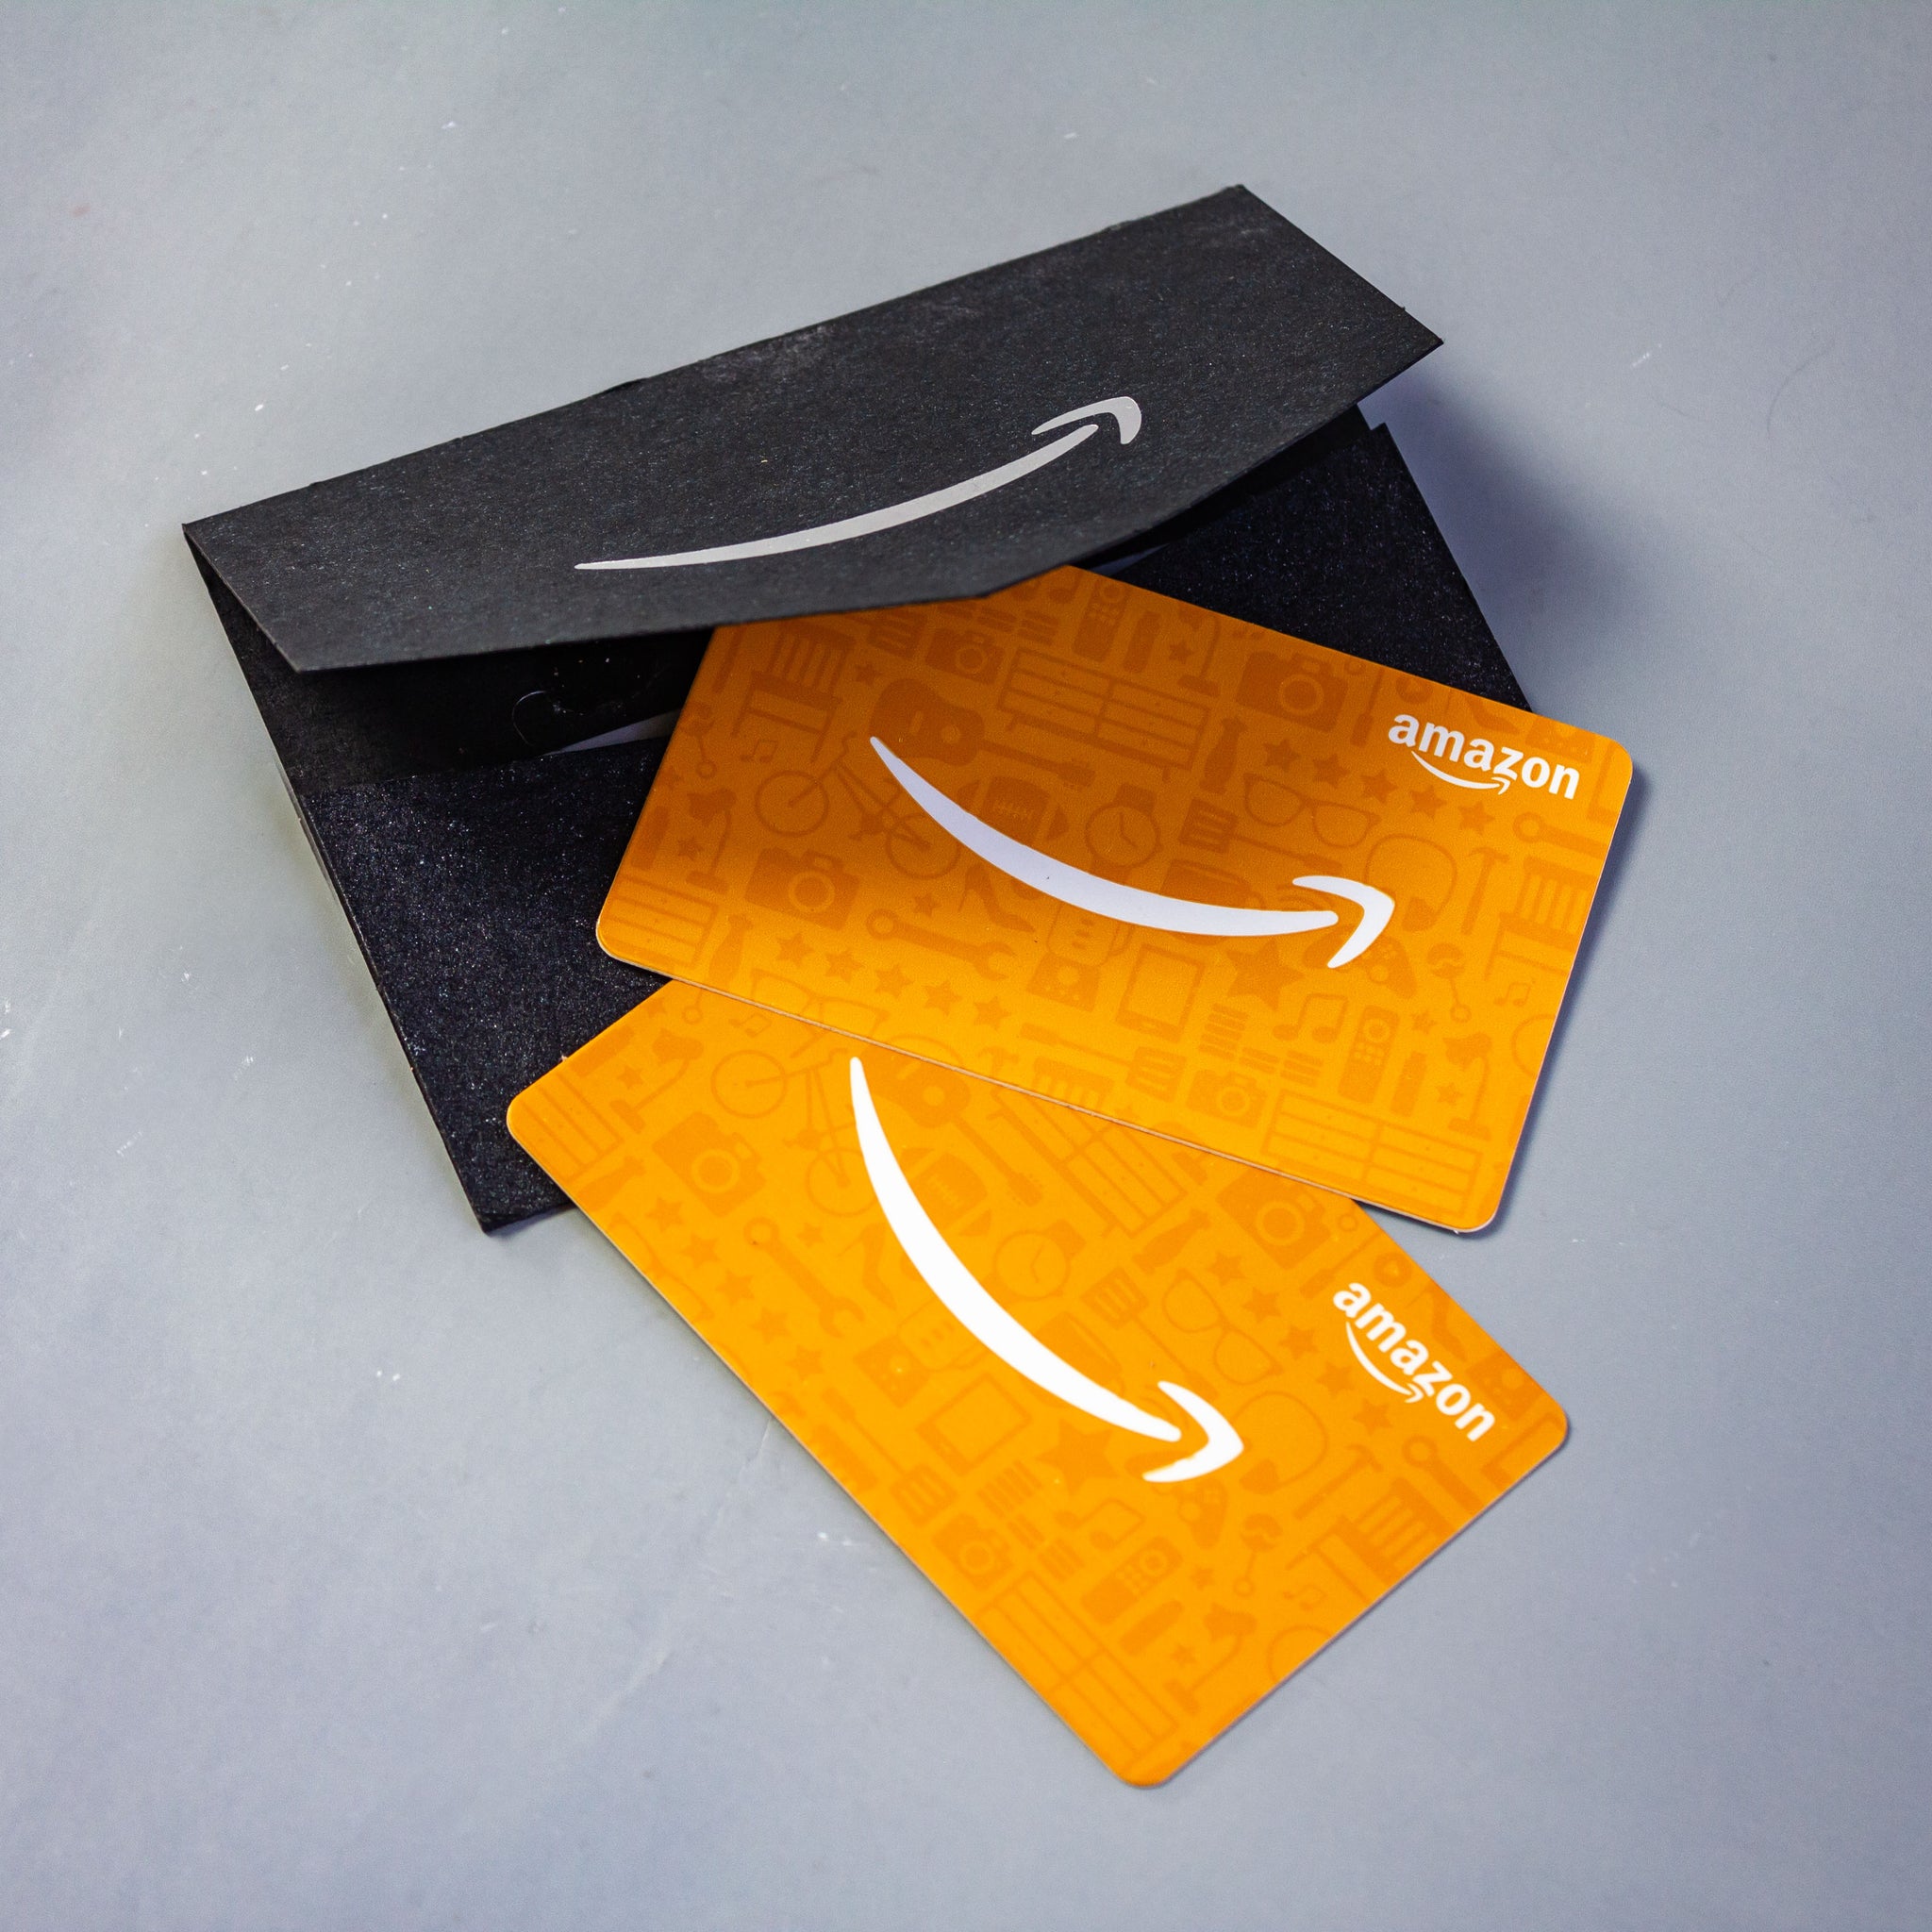 Amazon.in: Why Gift Cards are the perfect gift: Gift Cards